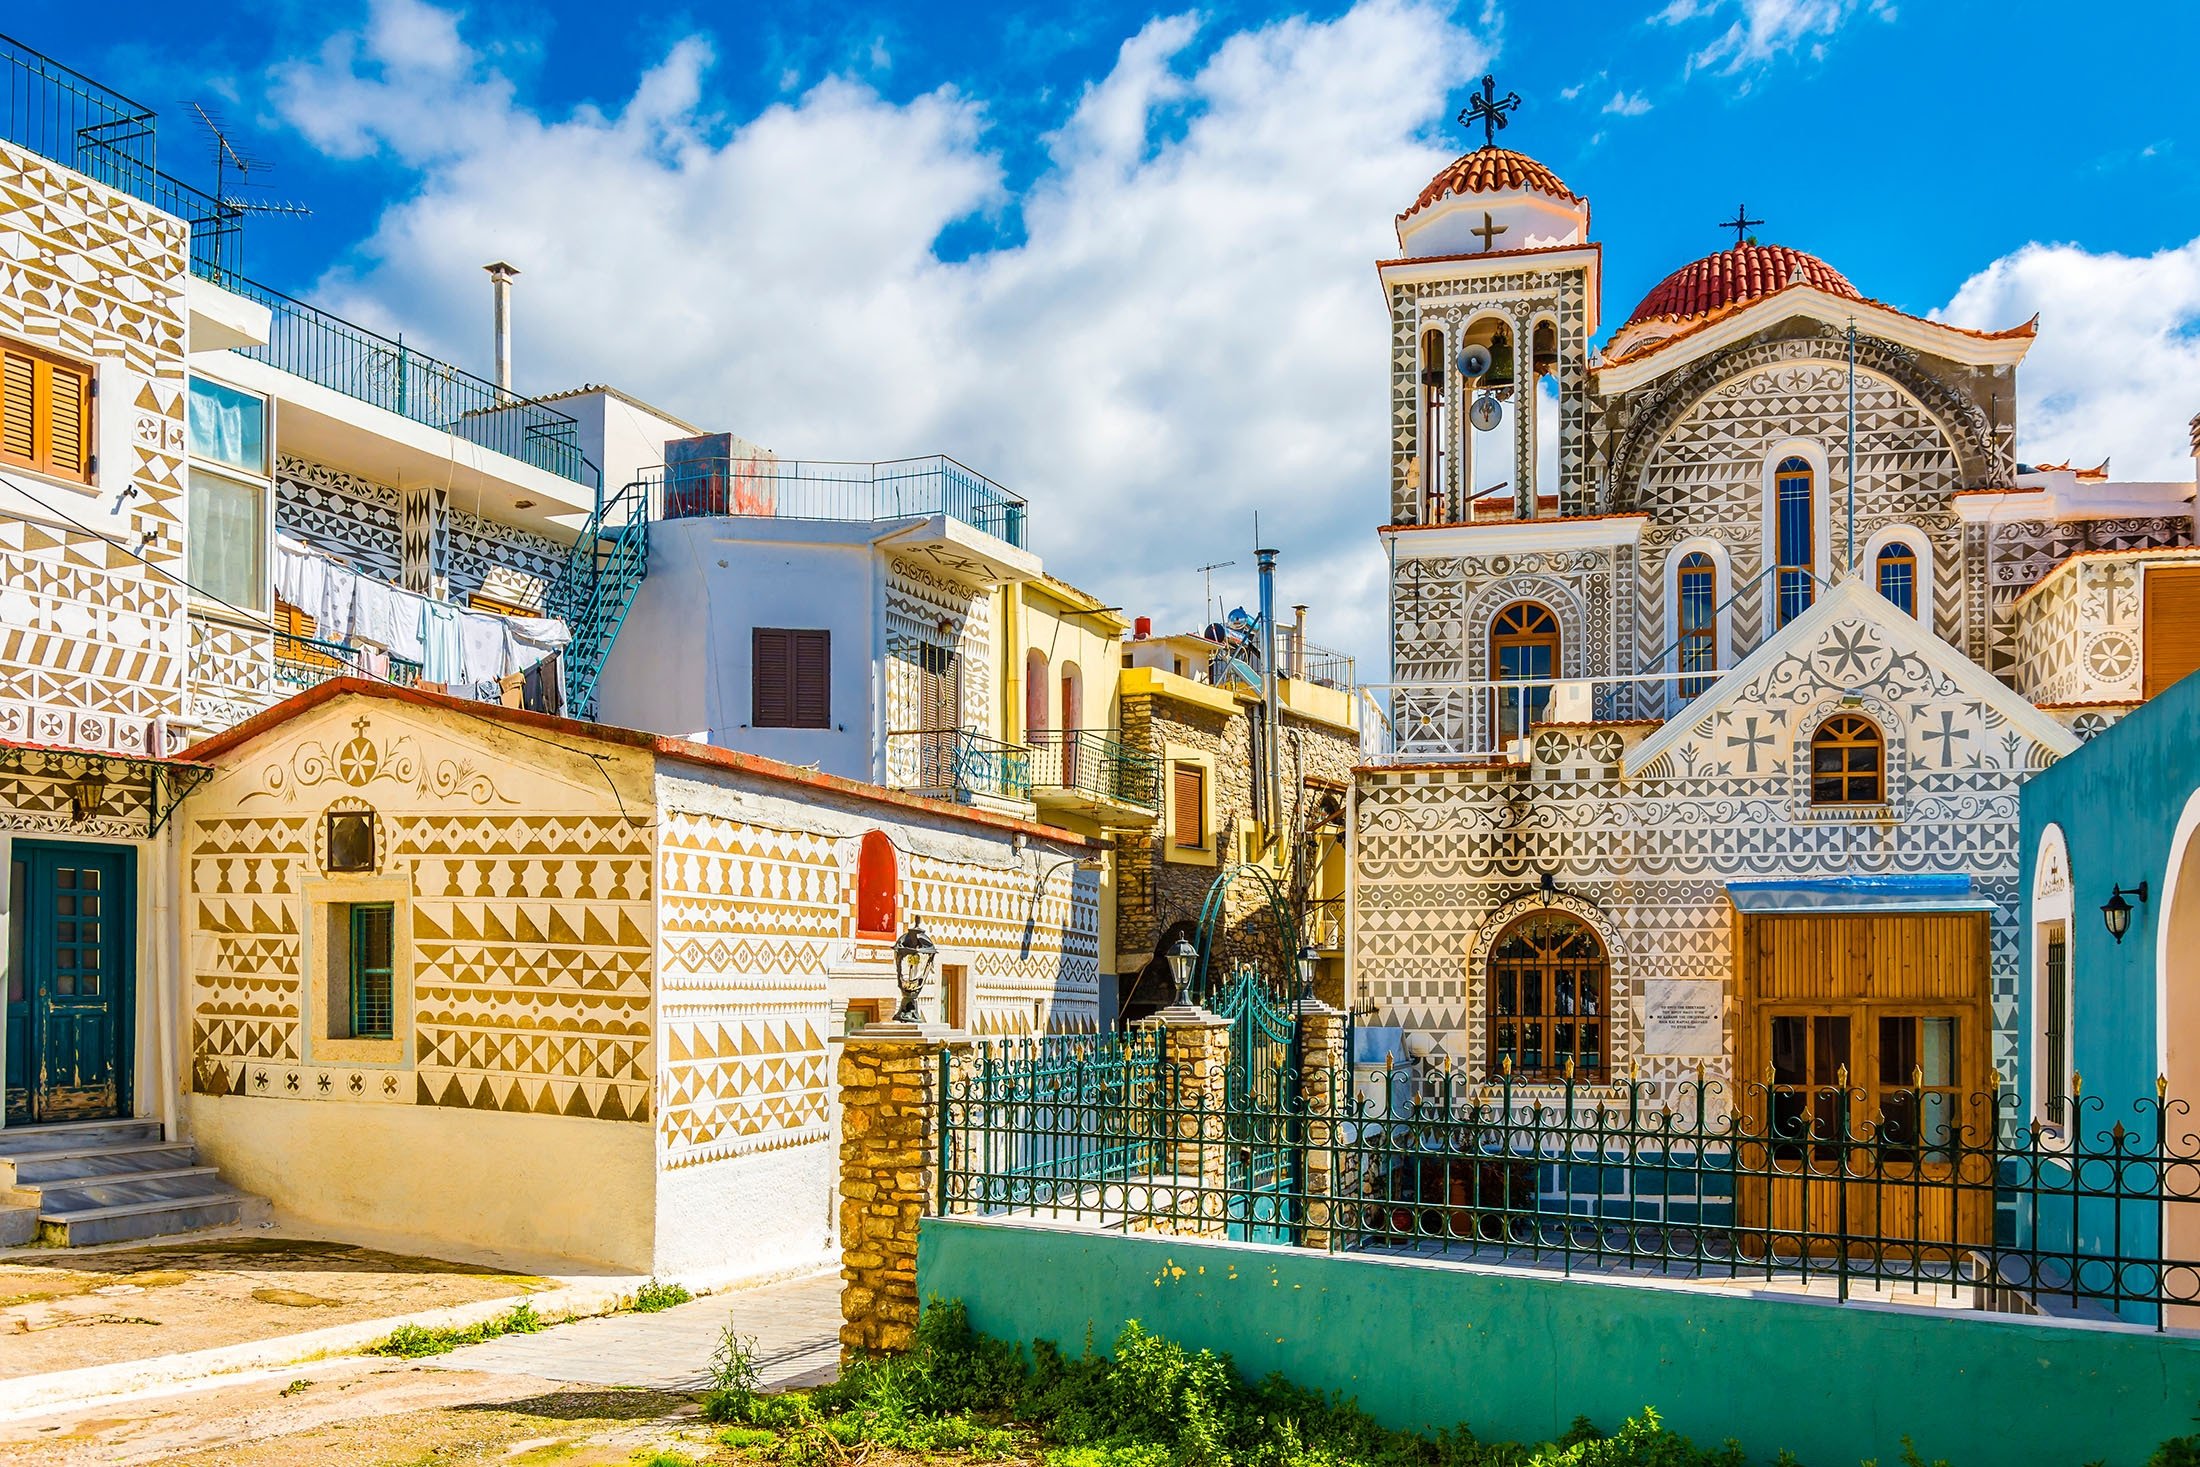 You can easily get lost in Chios, but you don’t need to worry about it, just bask in the atmosphere. (Shutterstock Photo)